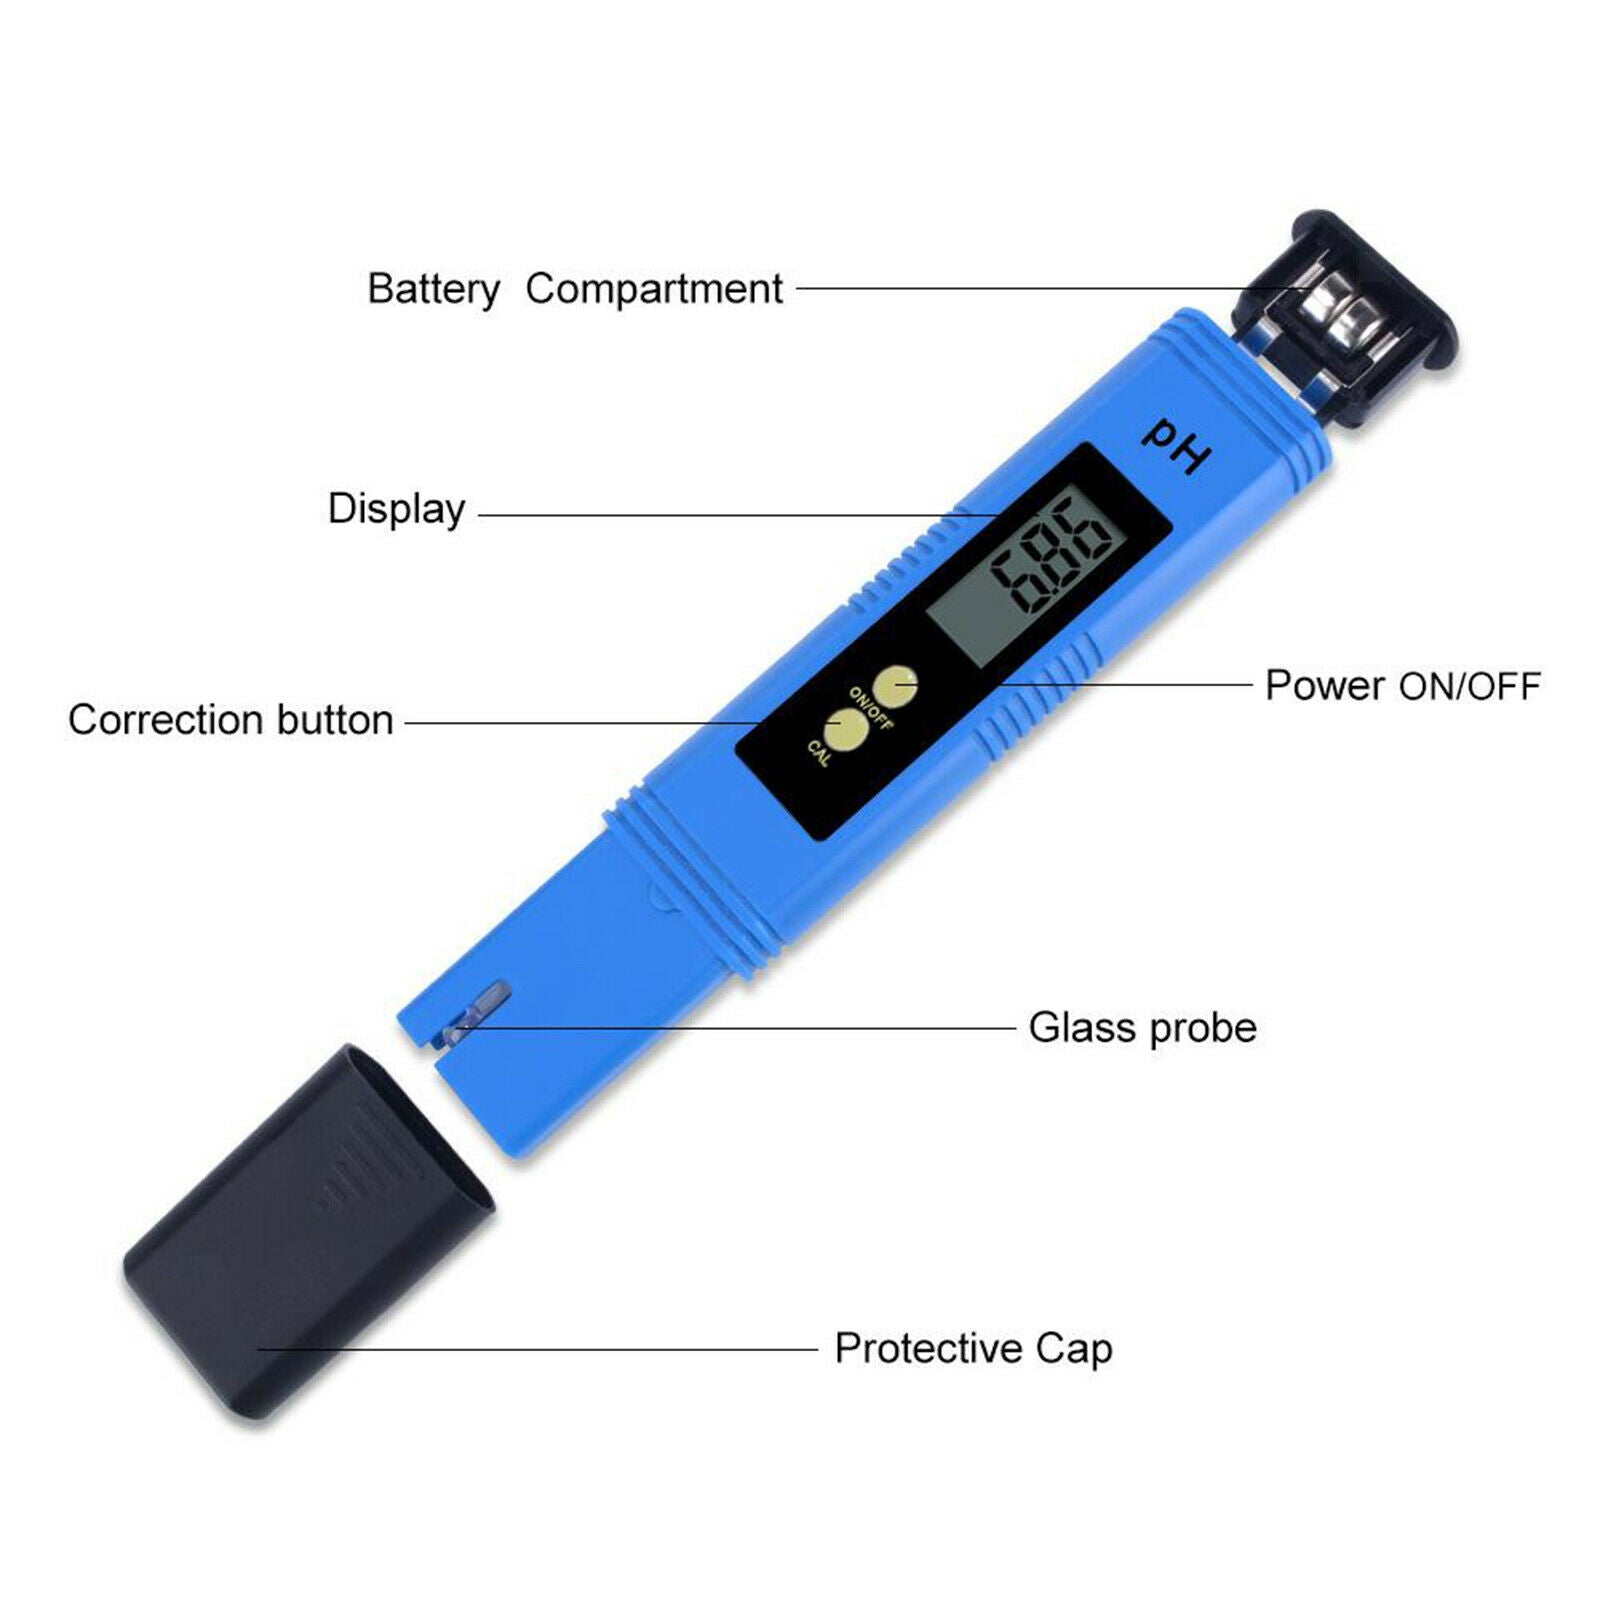 Portable pH Meter High Accuracy pH Tester Pen with Lcd Display for Aquarium